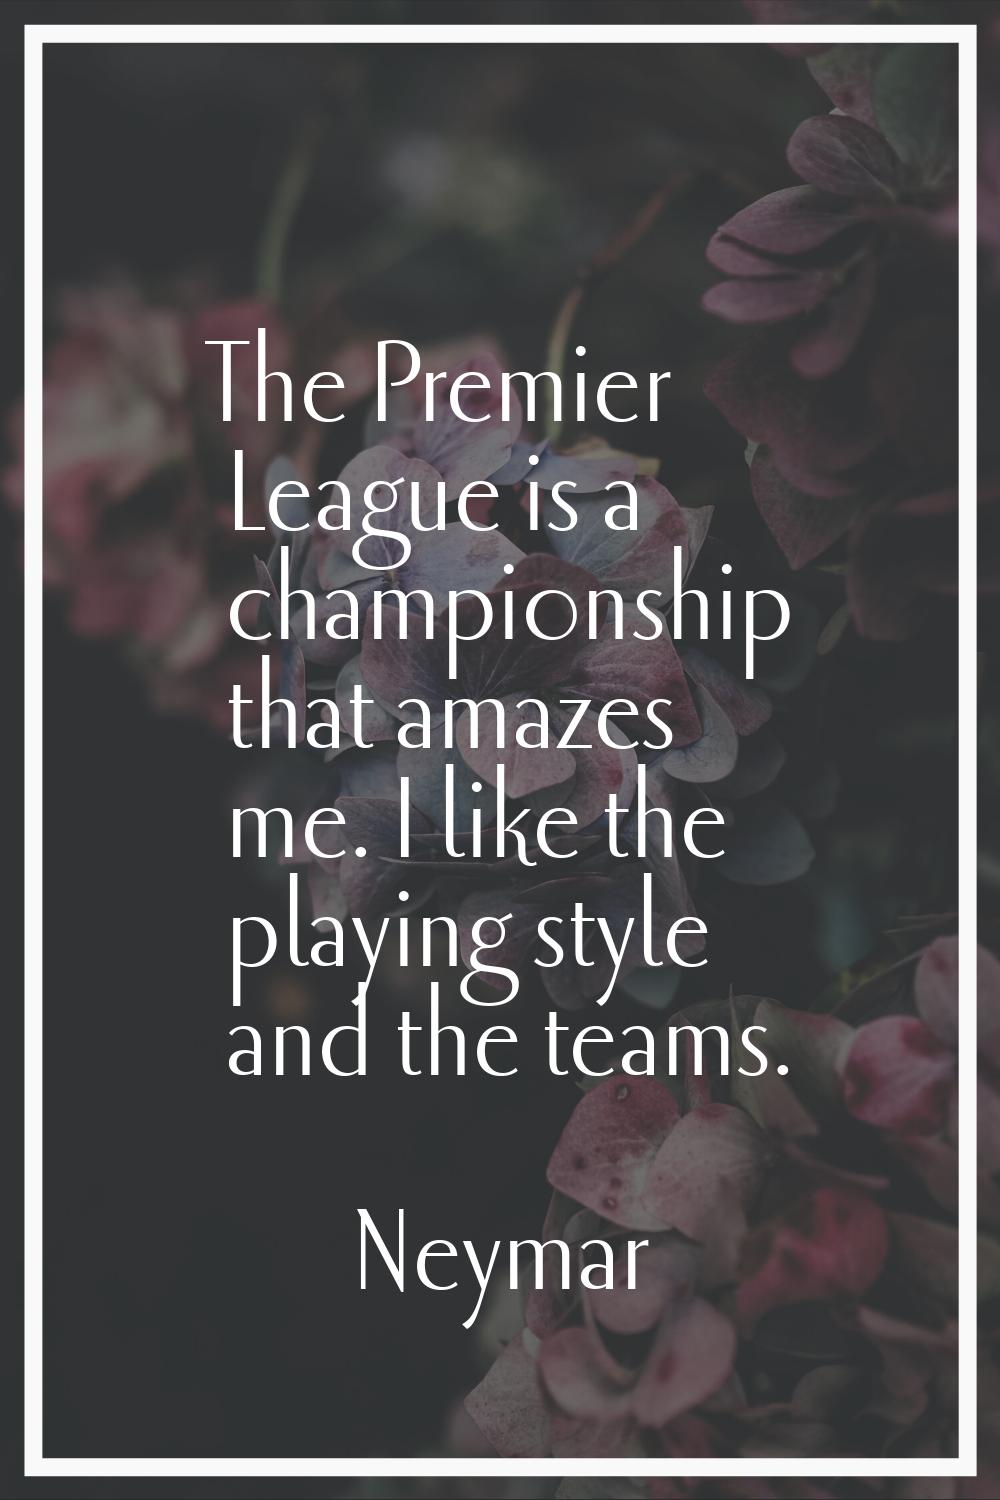 The Premier League is a championship that amazes me. I like the playing style and the teams.